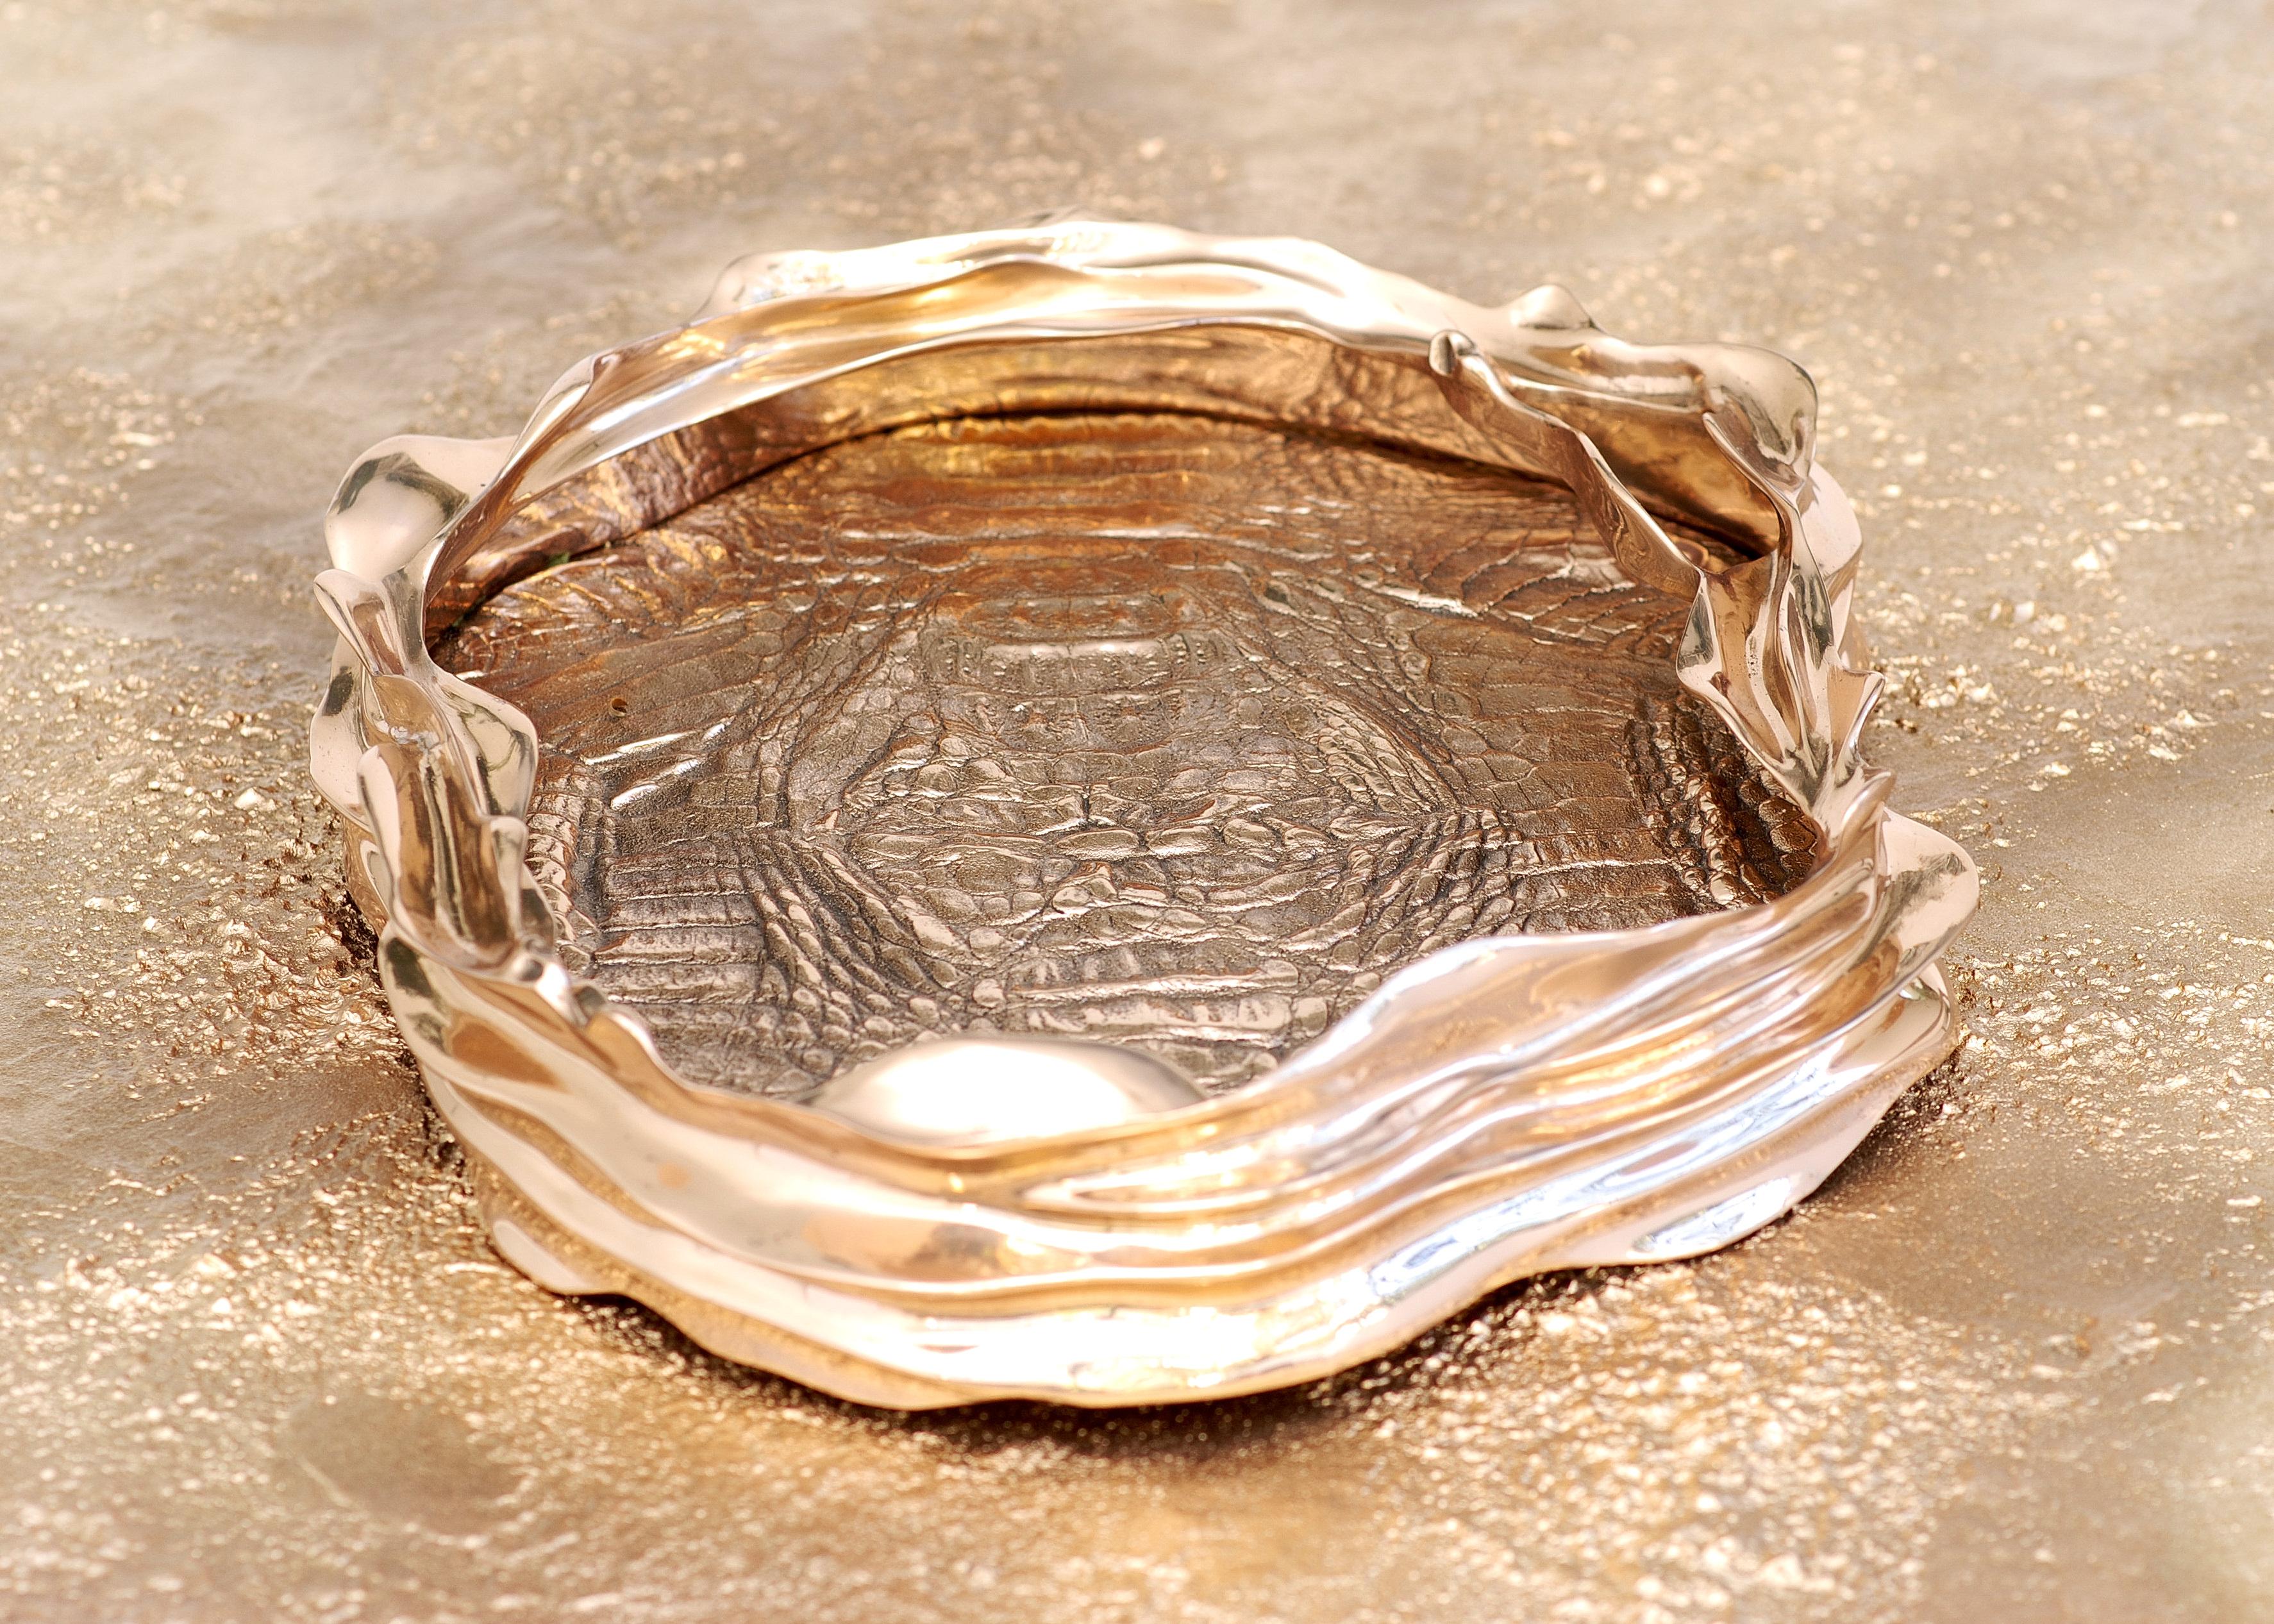 Modern Pair of Centerpieces Bowls in Polished Bronze by Fakasaka Design